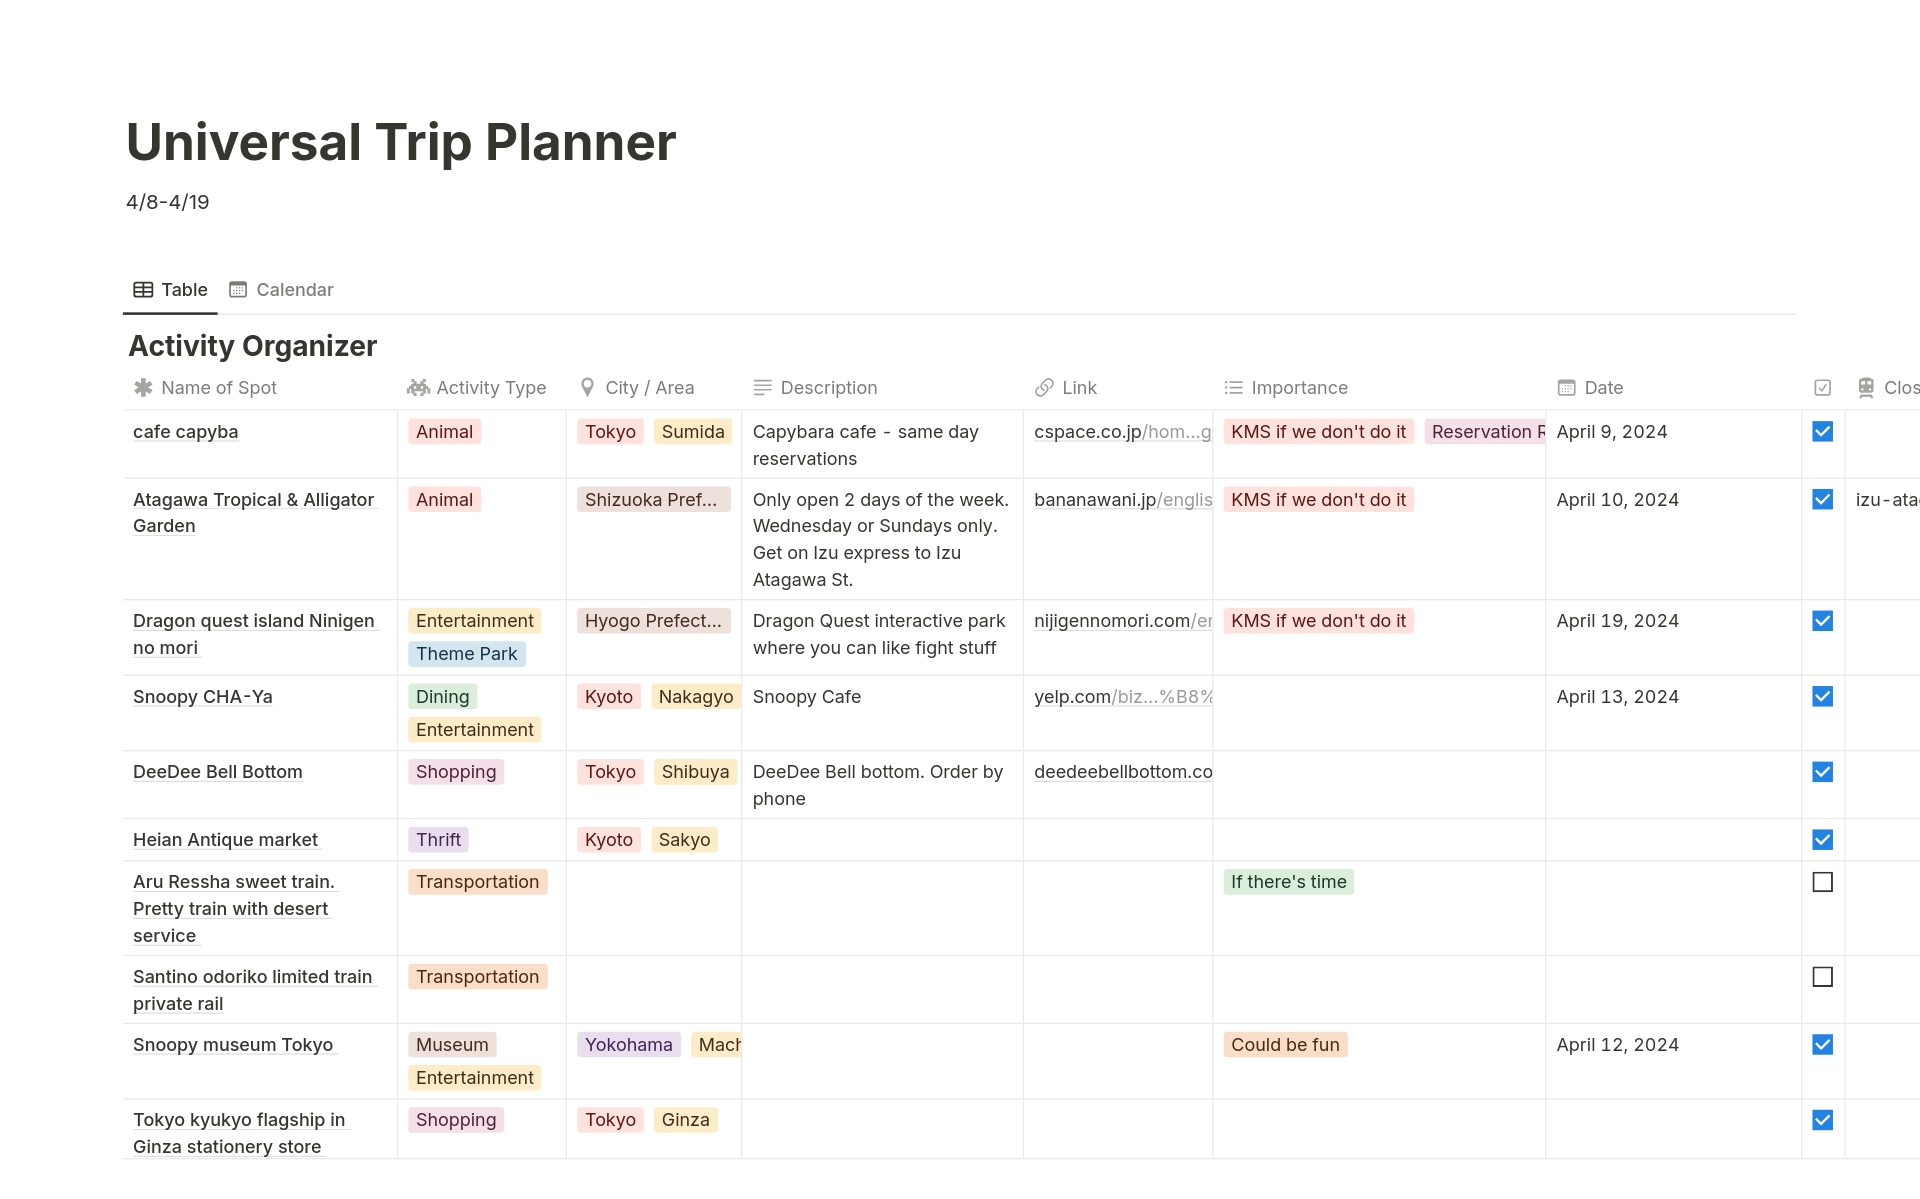 Simple but effective trip planner to organize anywhere you want to go, around the world or around your own city.